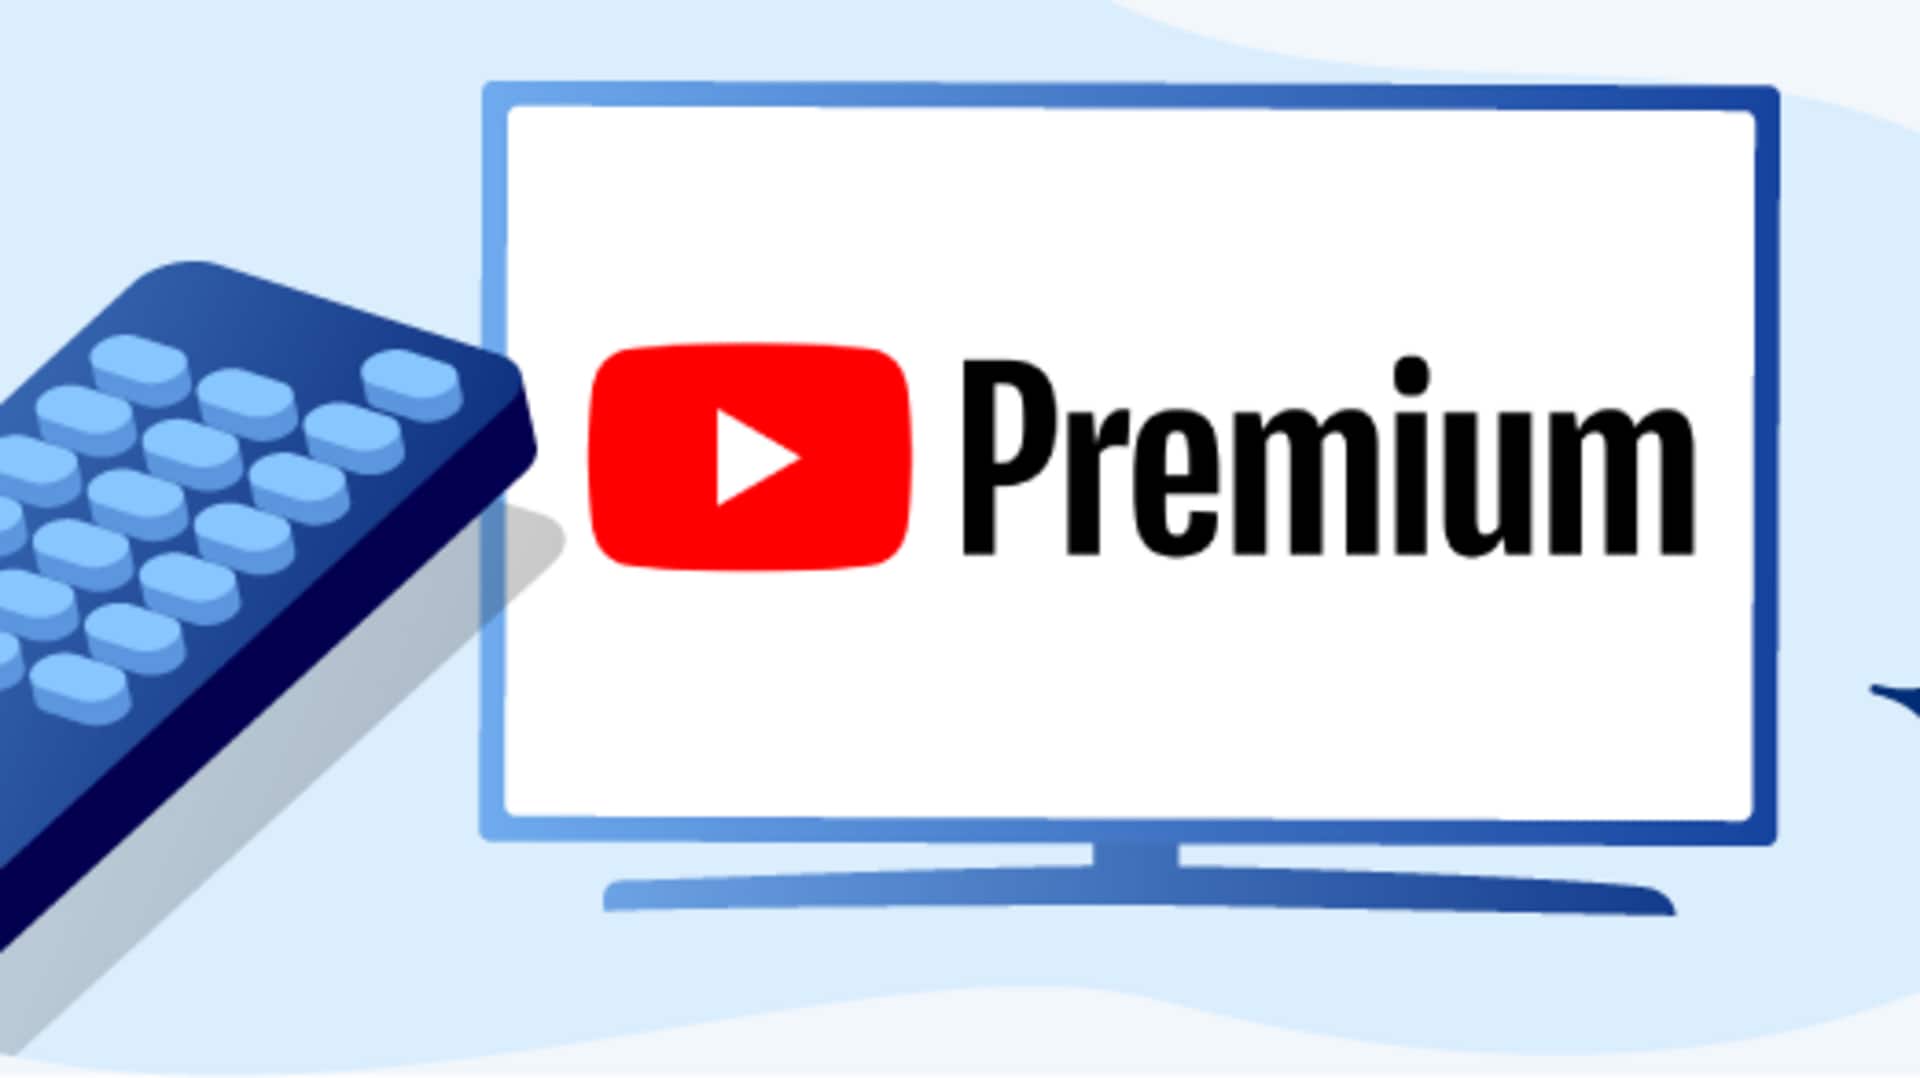 YouTube Premium now offers 1080p Enhanced bitrate support on Android